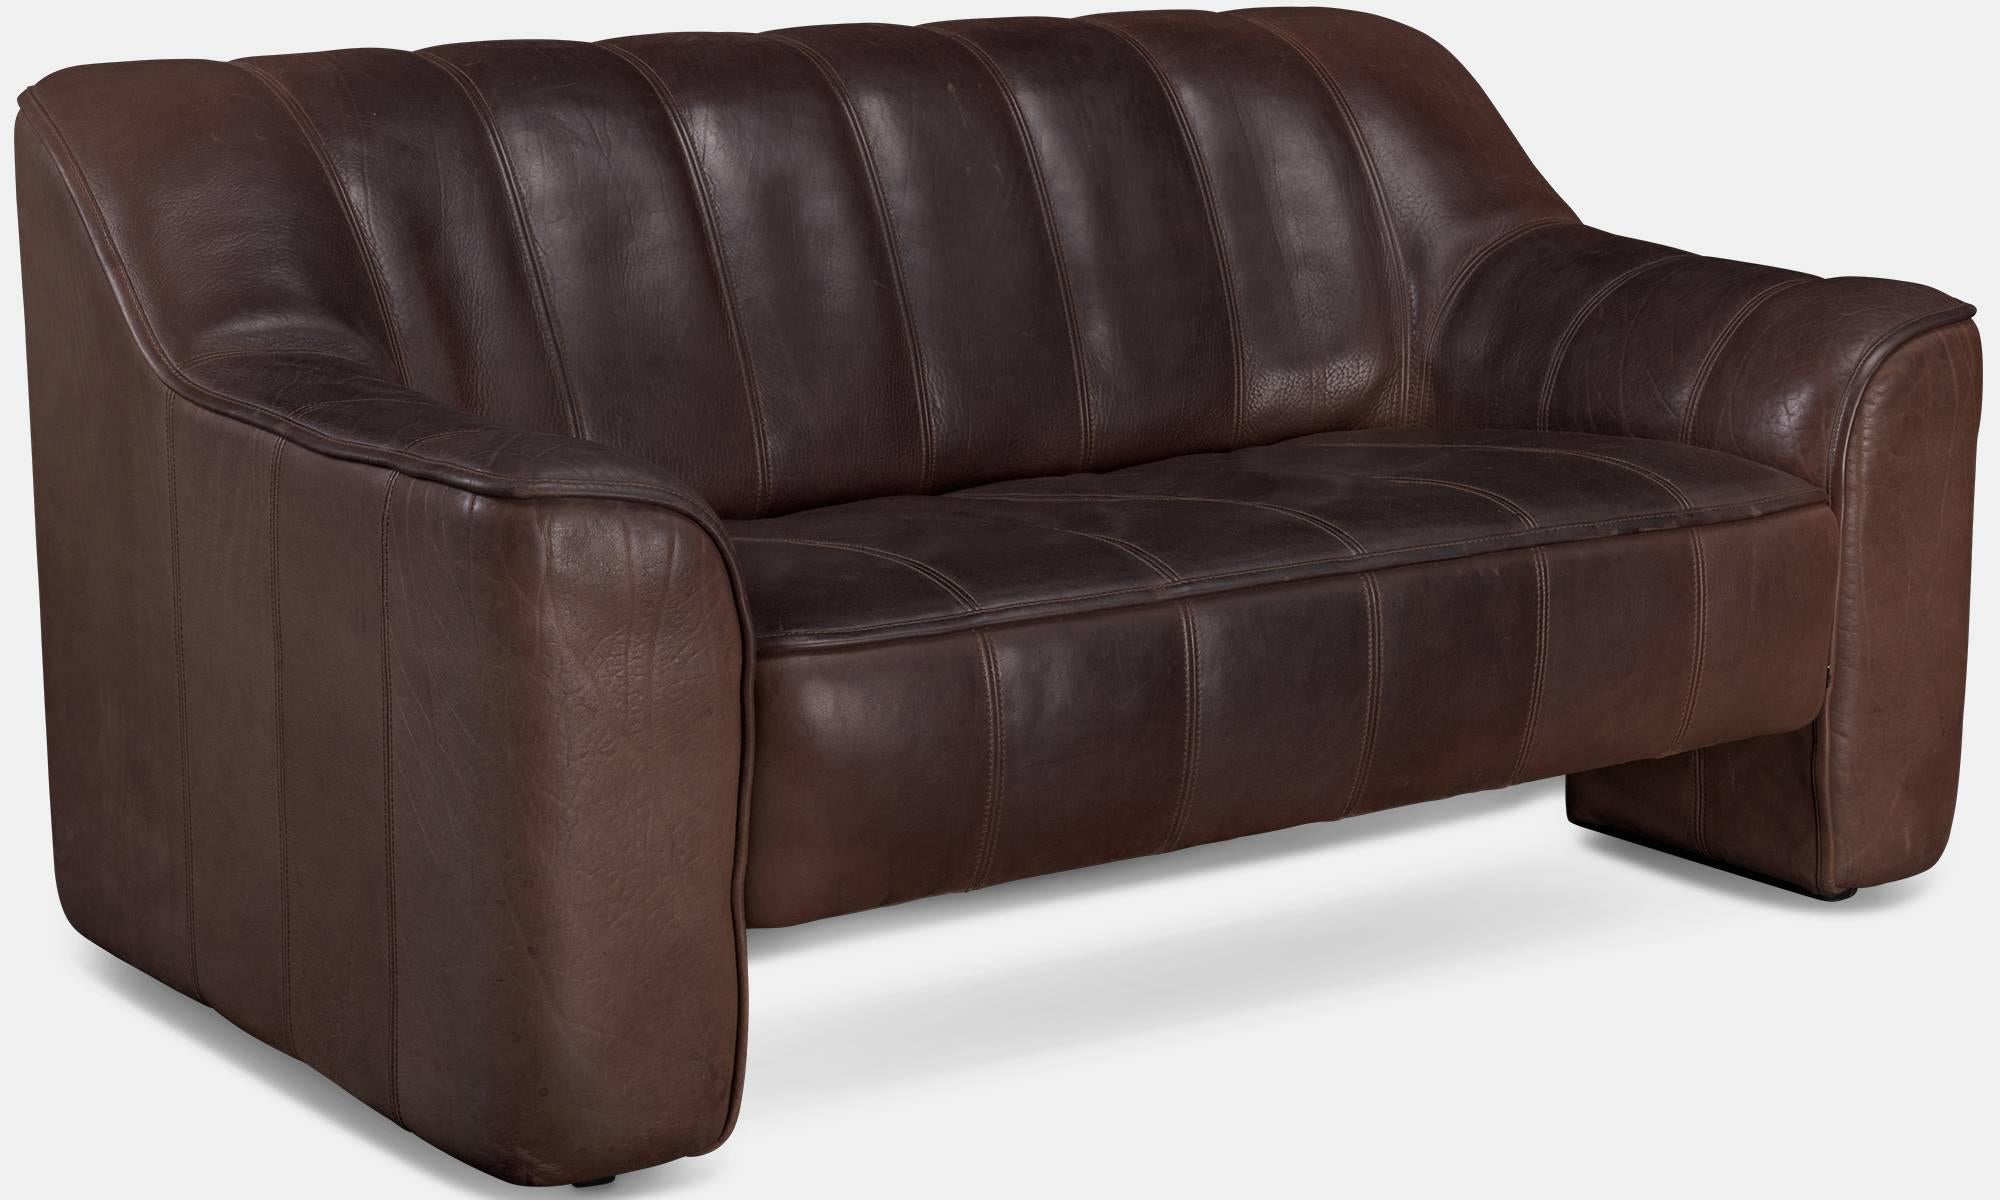 De Sede Leather Loveseat, circa 1970.

Model DS-44 two-seat sofa with original deep brown buffalo leather and solid wood frame.